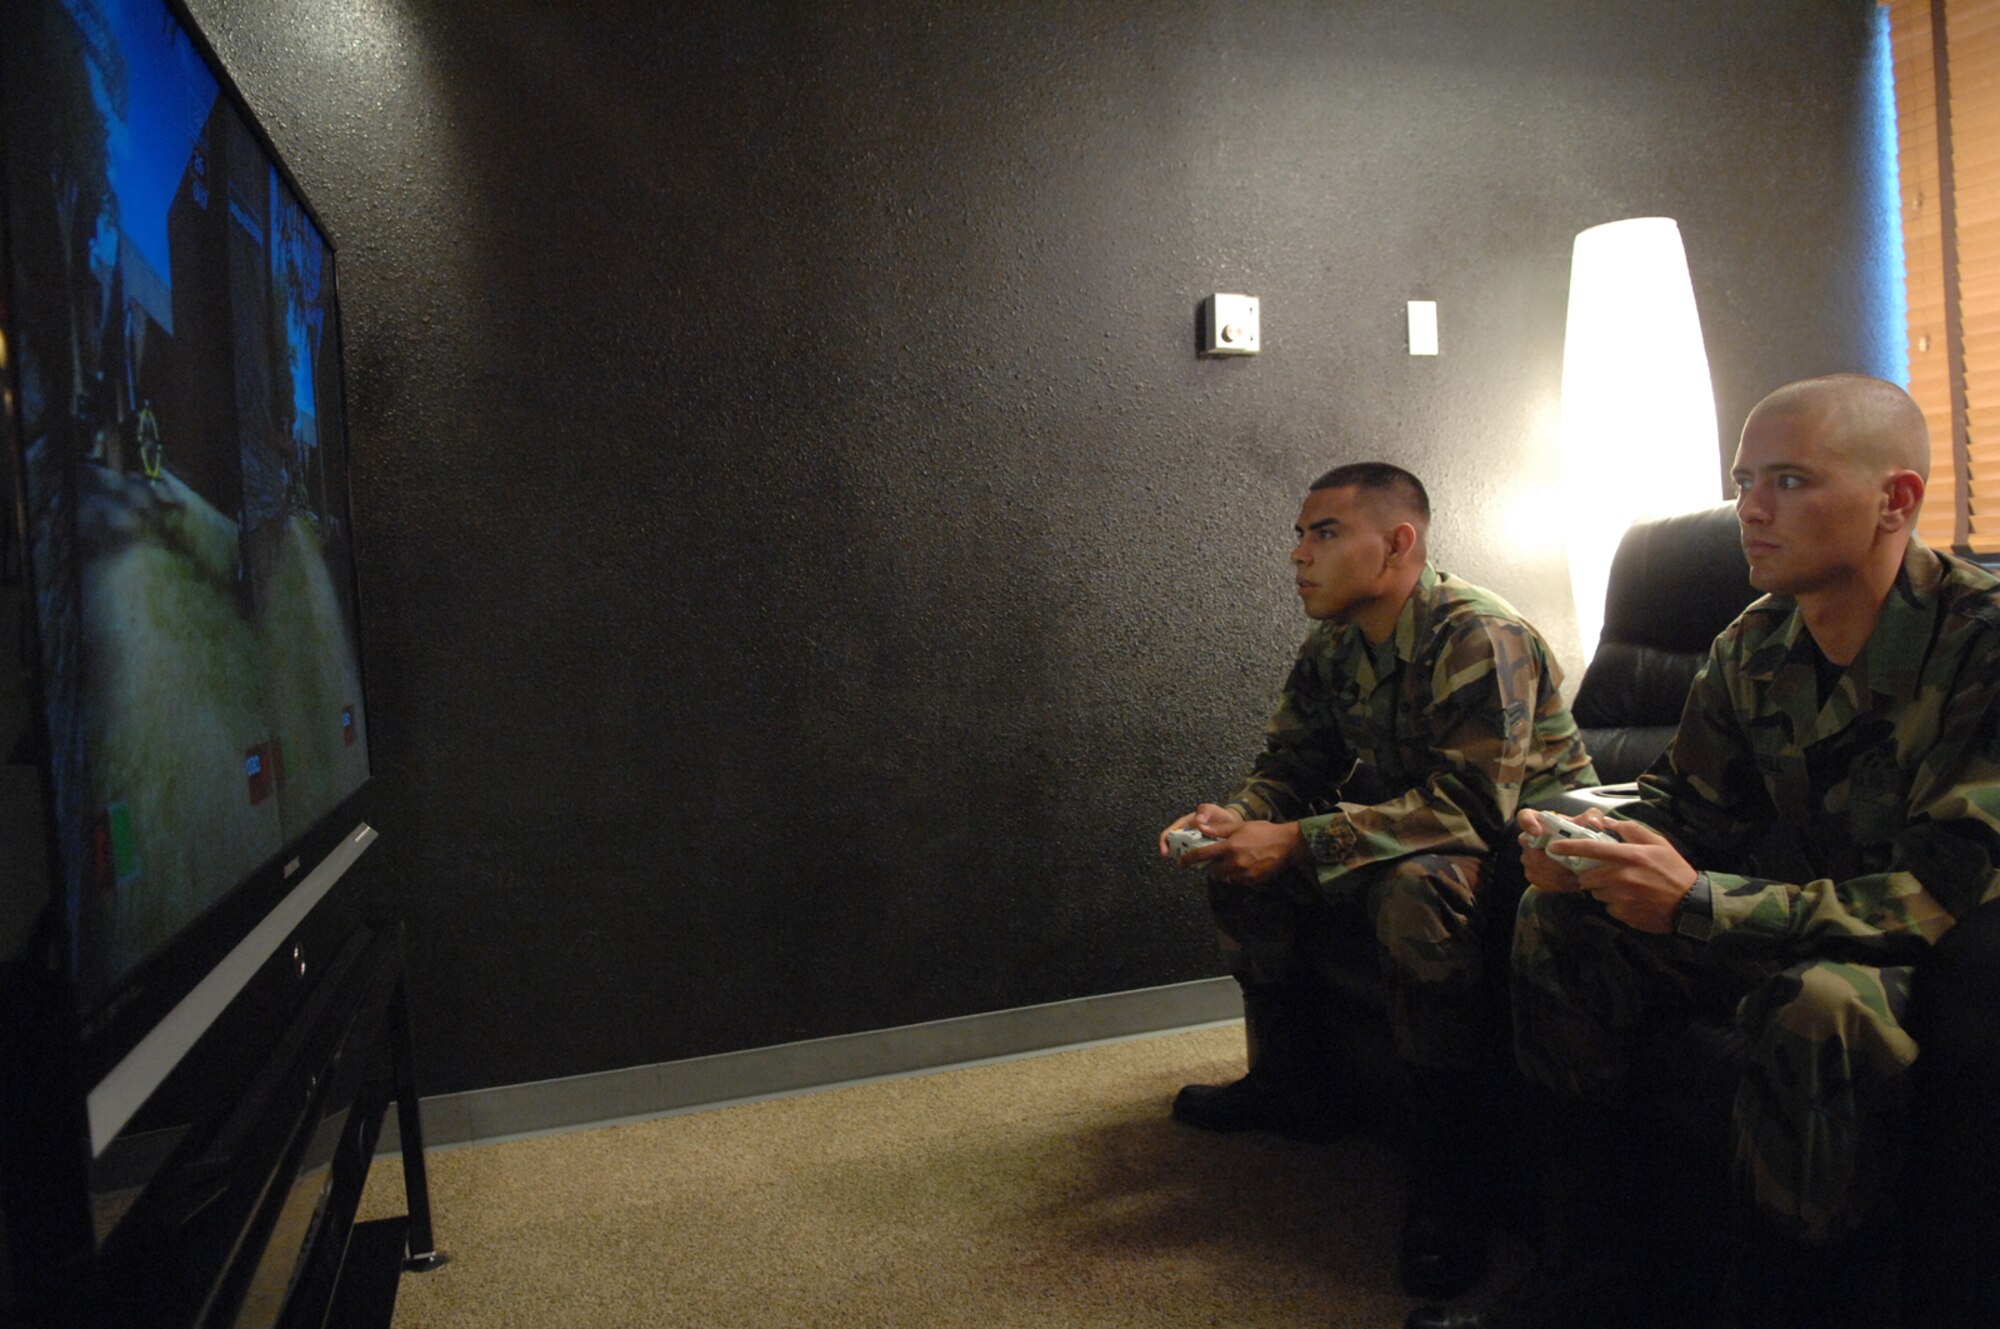 Airman First Class Nori Flores (left), 57th Aircraft Maintenance Squadron F-16 Avionics Apprentice and Brandon Bell, 57th Equipment Maintenance Squadron Ammo Technician, plays a game of Tom Clancy's Ghost Recon on the new Microsoft X-Box 360 in one of the two video gaming rooms inside the new Nellis Airmen's Center June 12.
(U.S Air Force Photo/Senior Airman Larry E. Reid Jr.)